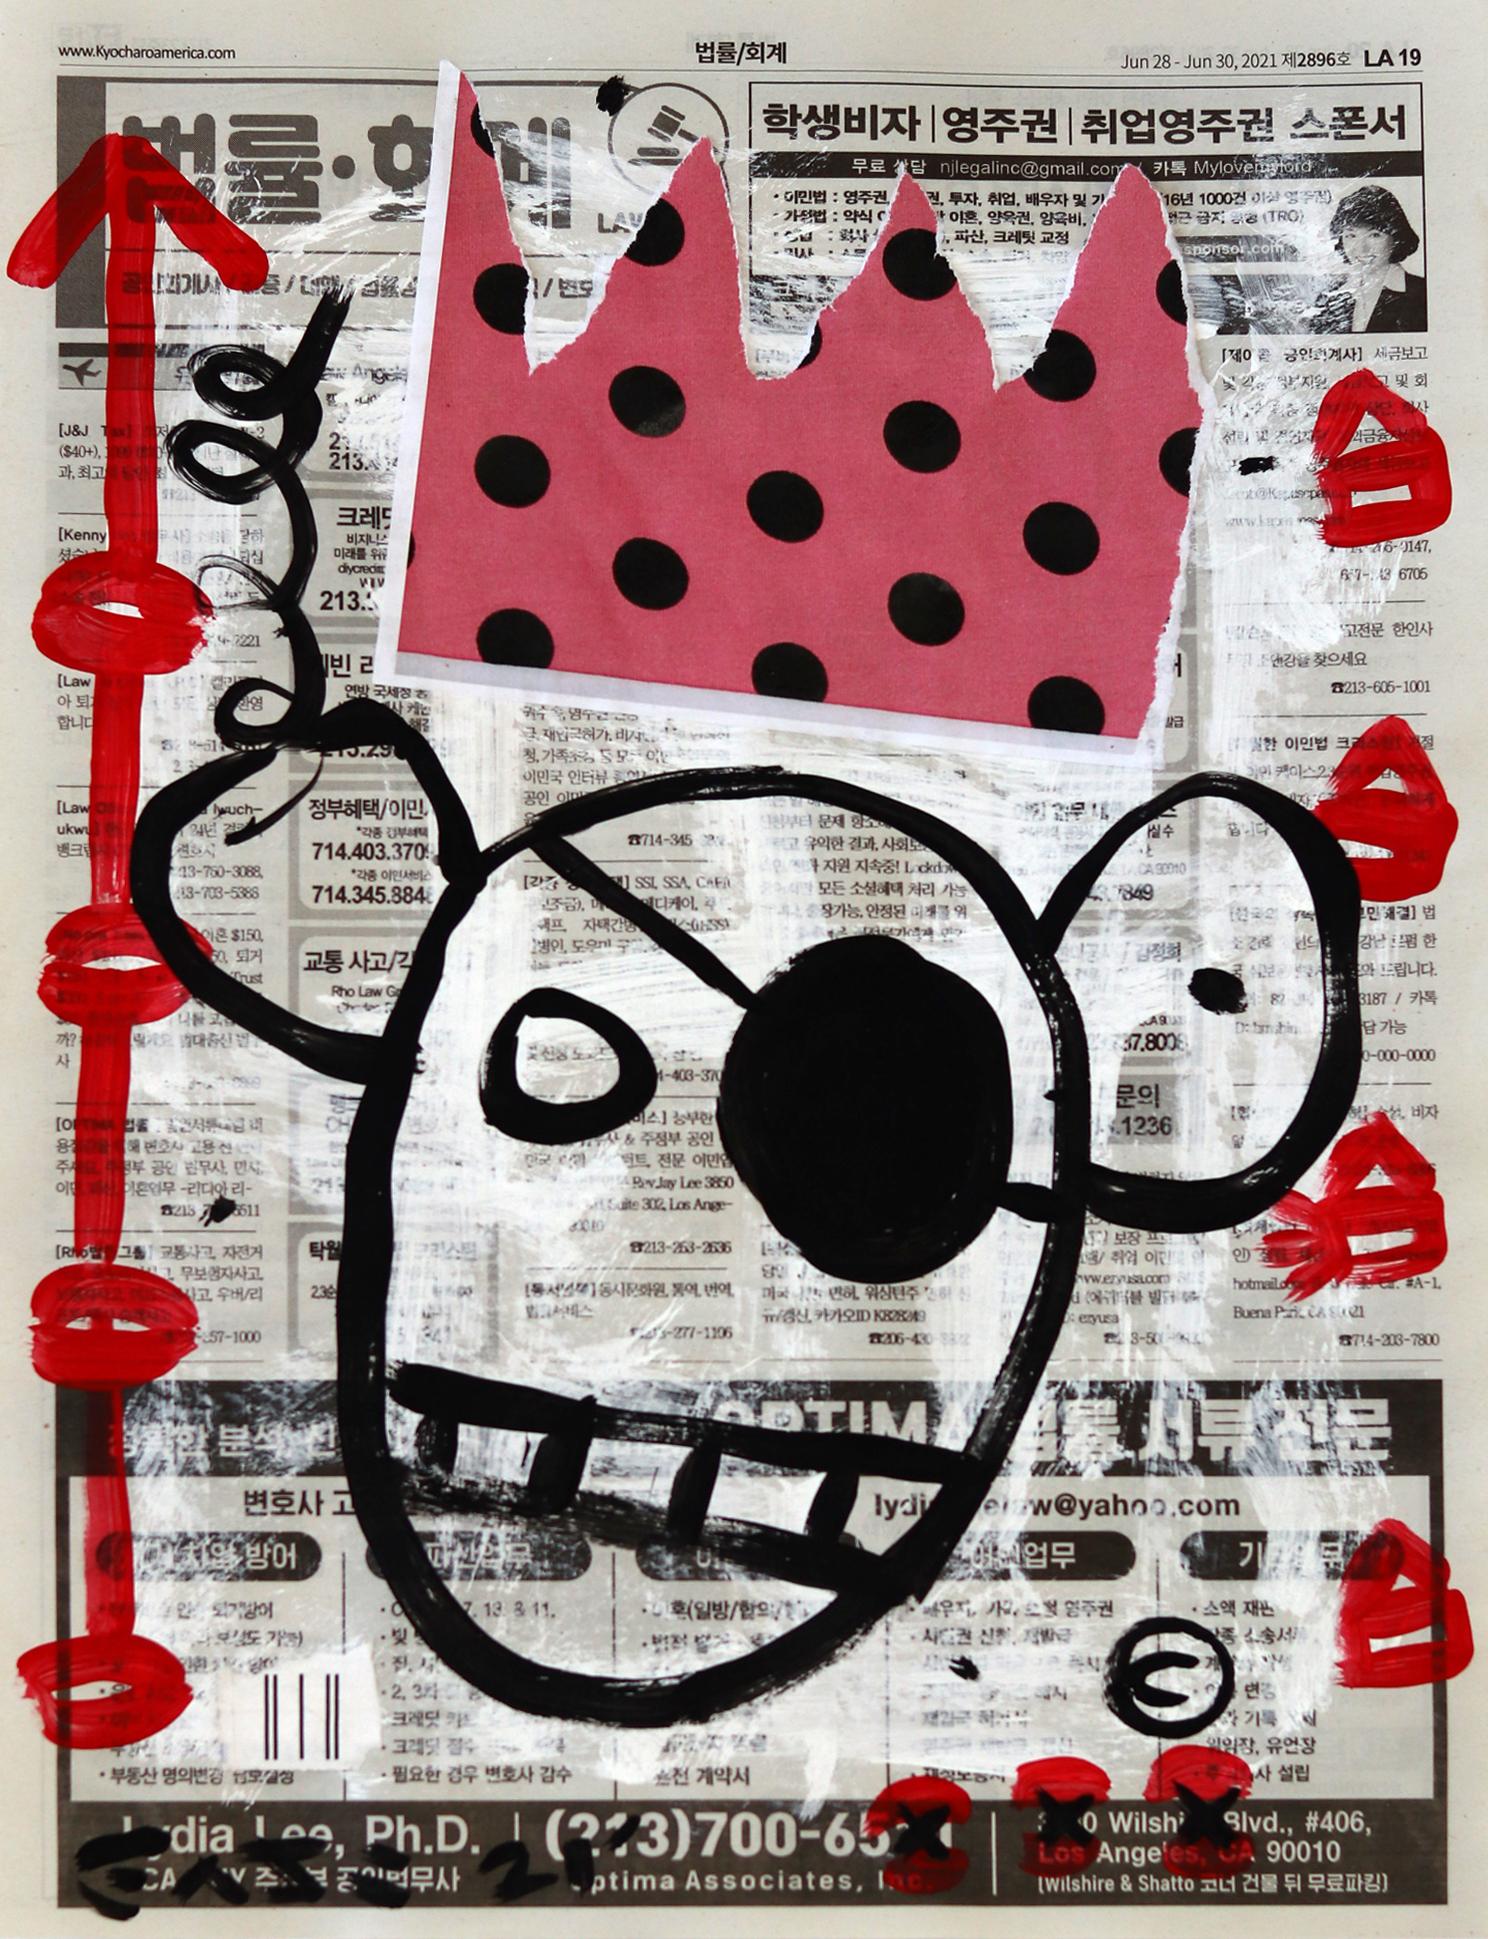 Los Angeles street artist Gary John exploded onto the international art scene first during Art Basel Miami in 2013. John’s playfully bold work quickly gained attention and he was named one of 20 standout artists at the 2014 NY Affordable Art Fair.